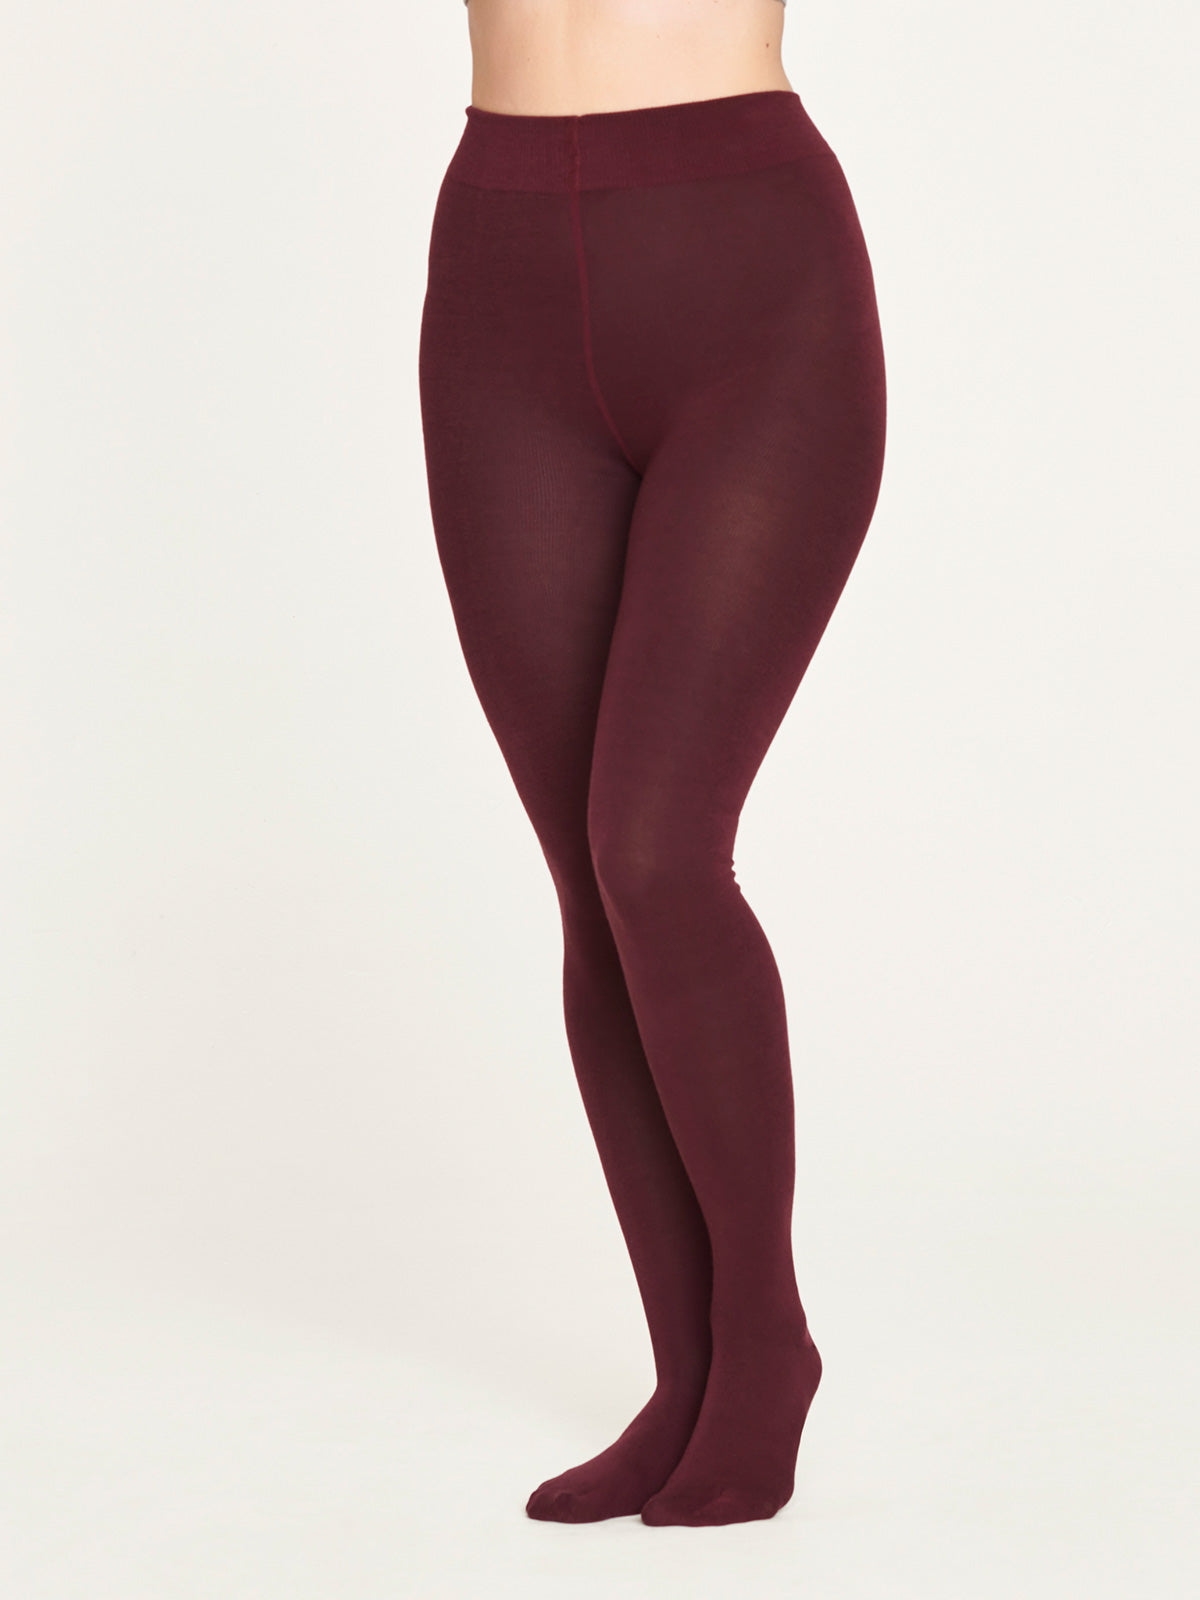 Elgin-3 - Bamboo - RecyclePoly - Tights